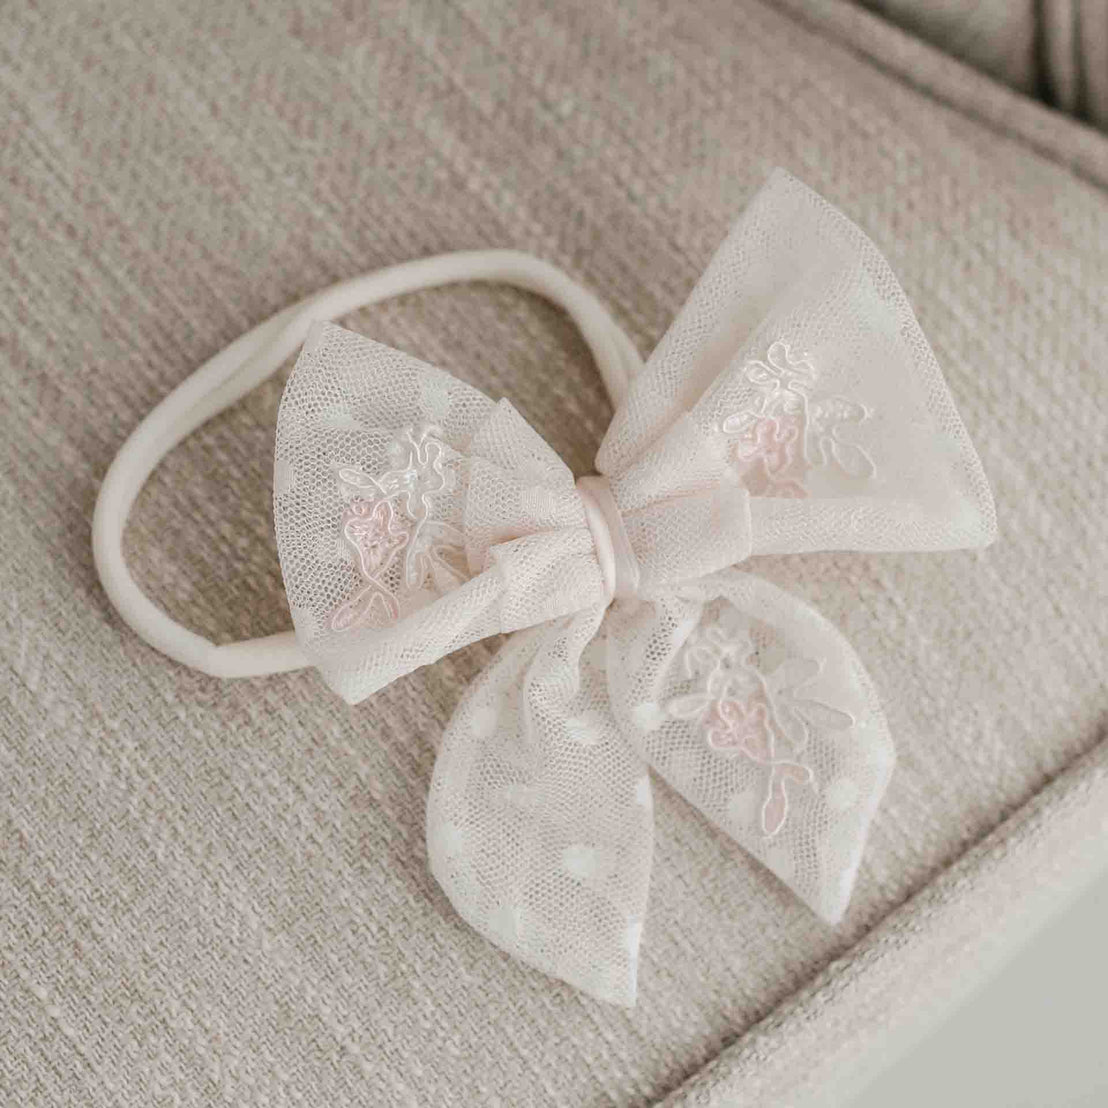 A delicate, beige Elizabeth Lace Bow Headband topped with a large, decorative bow featuring intricate white floral embroidery, ideal for christening and displayed on a soft, textured cushion.